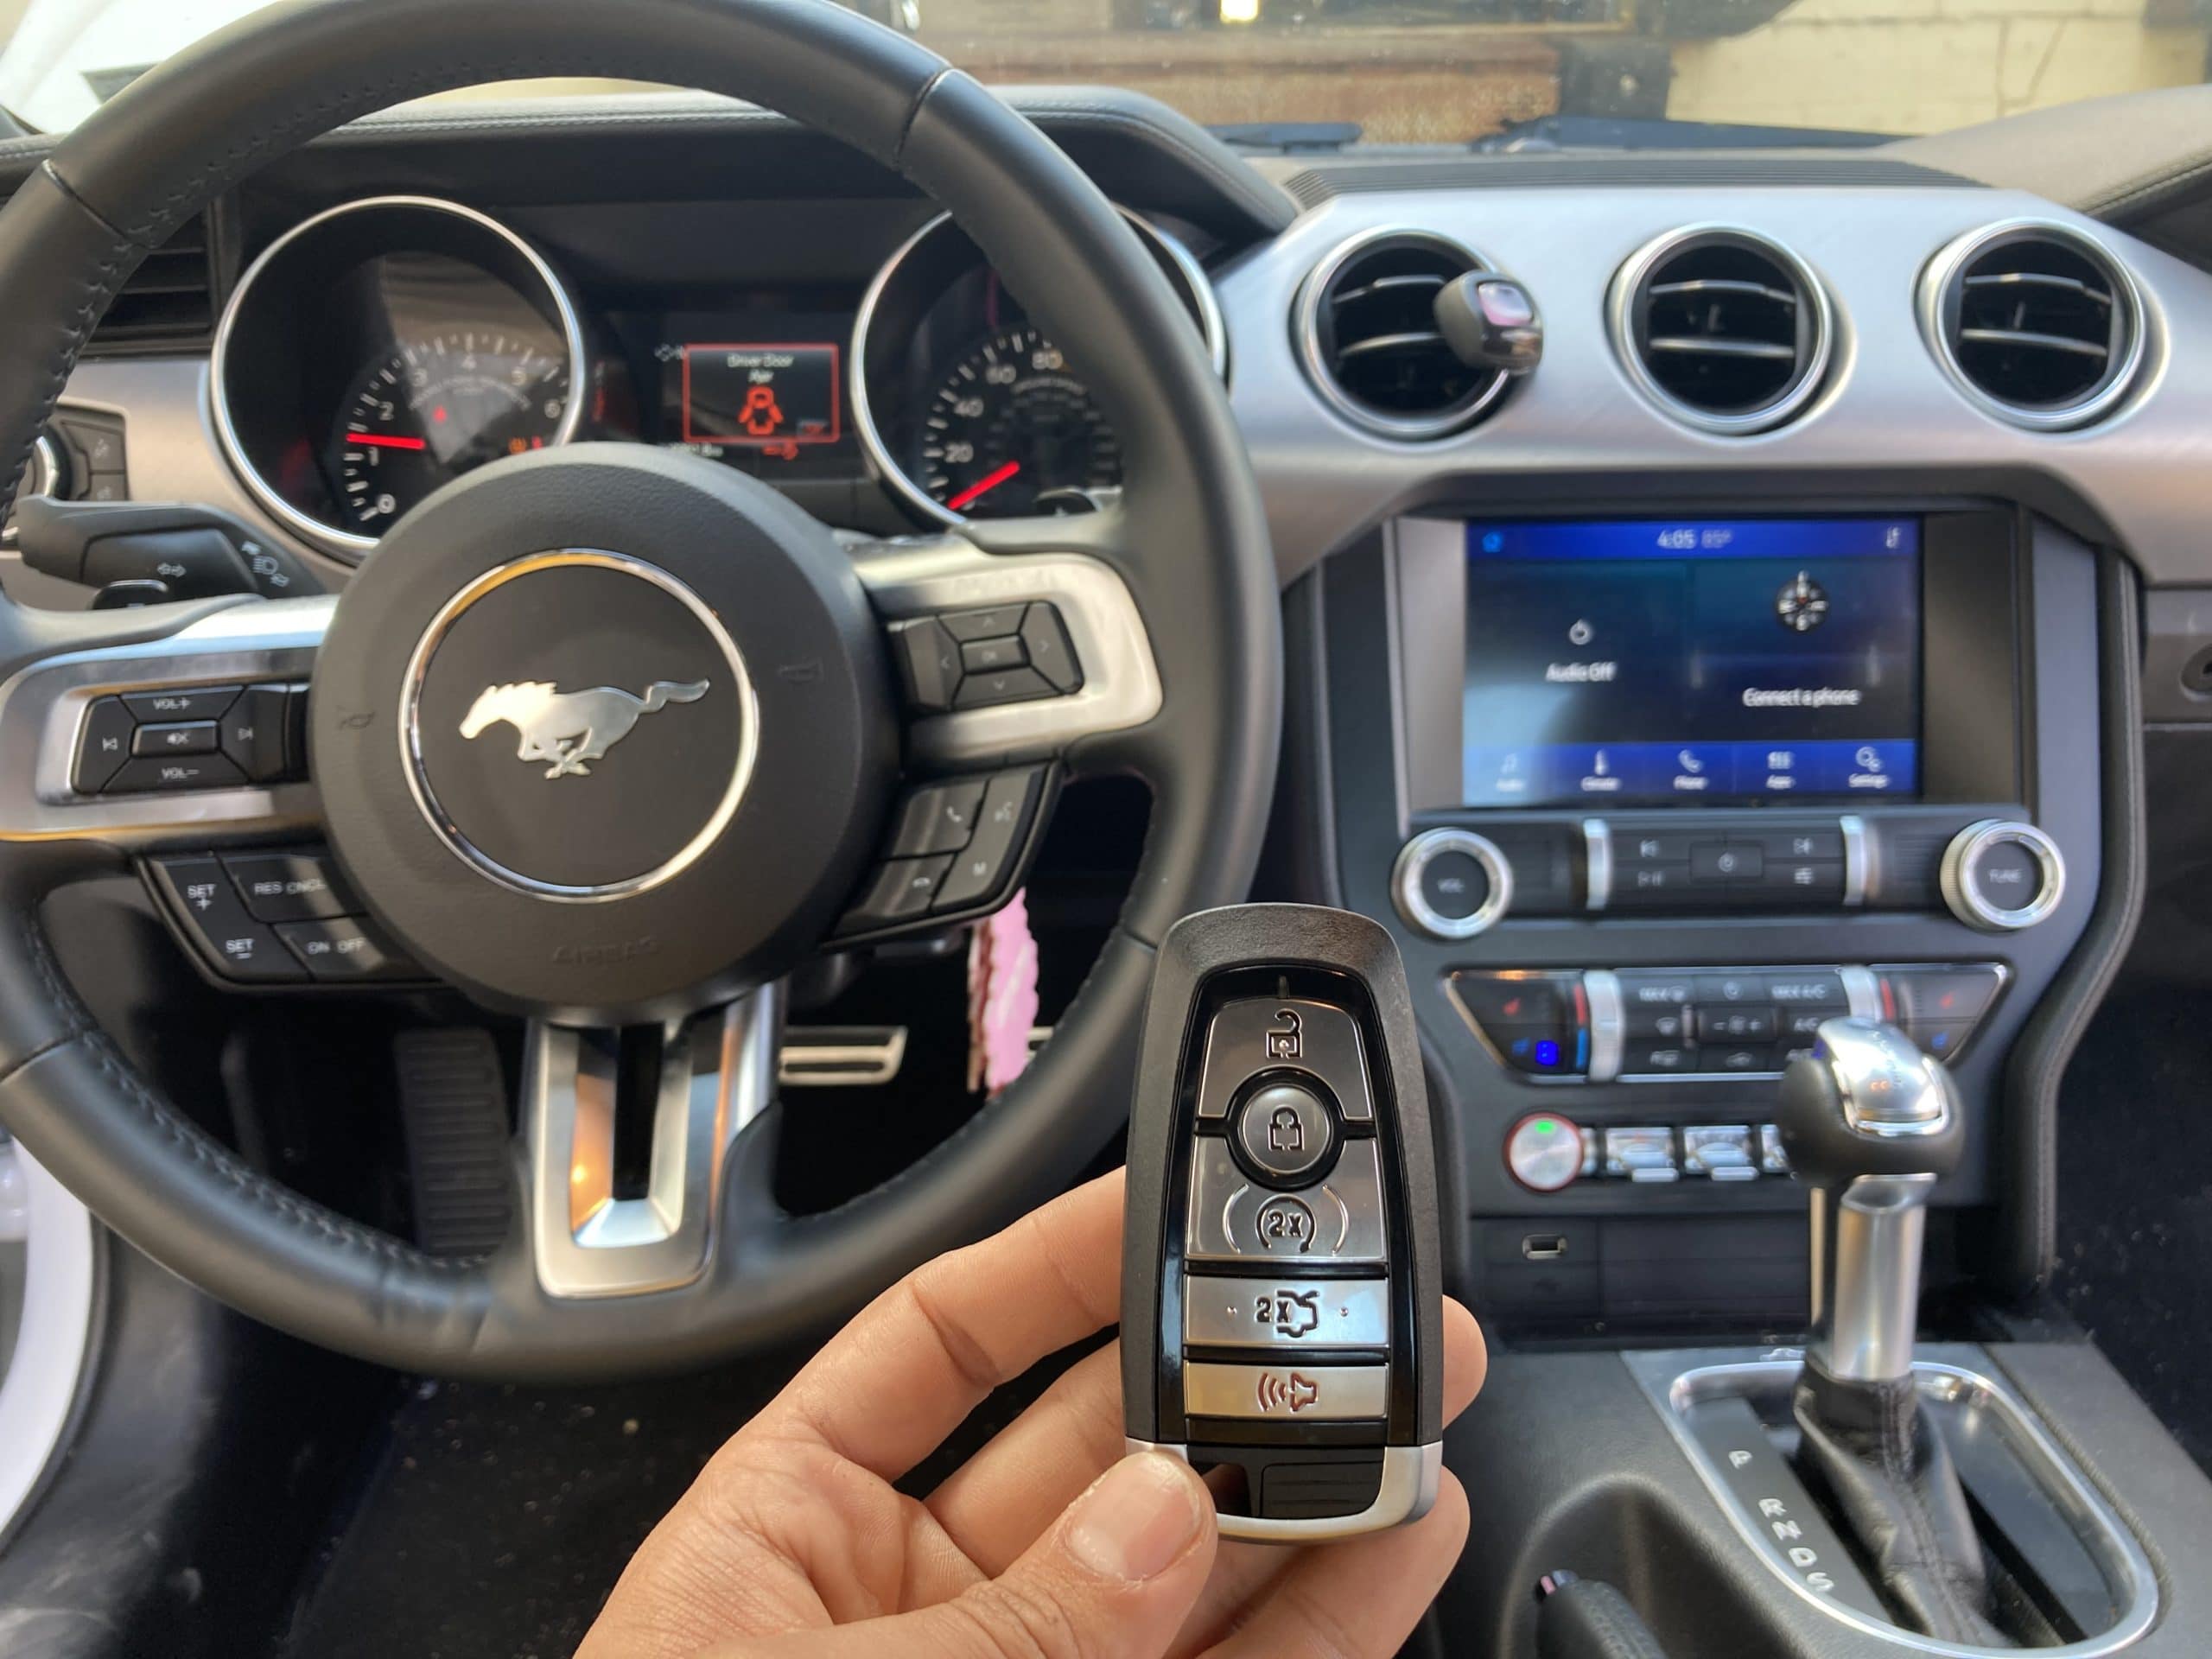 Newly-programmed remote for a happy Mustang owner.